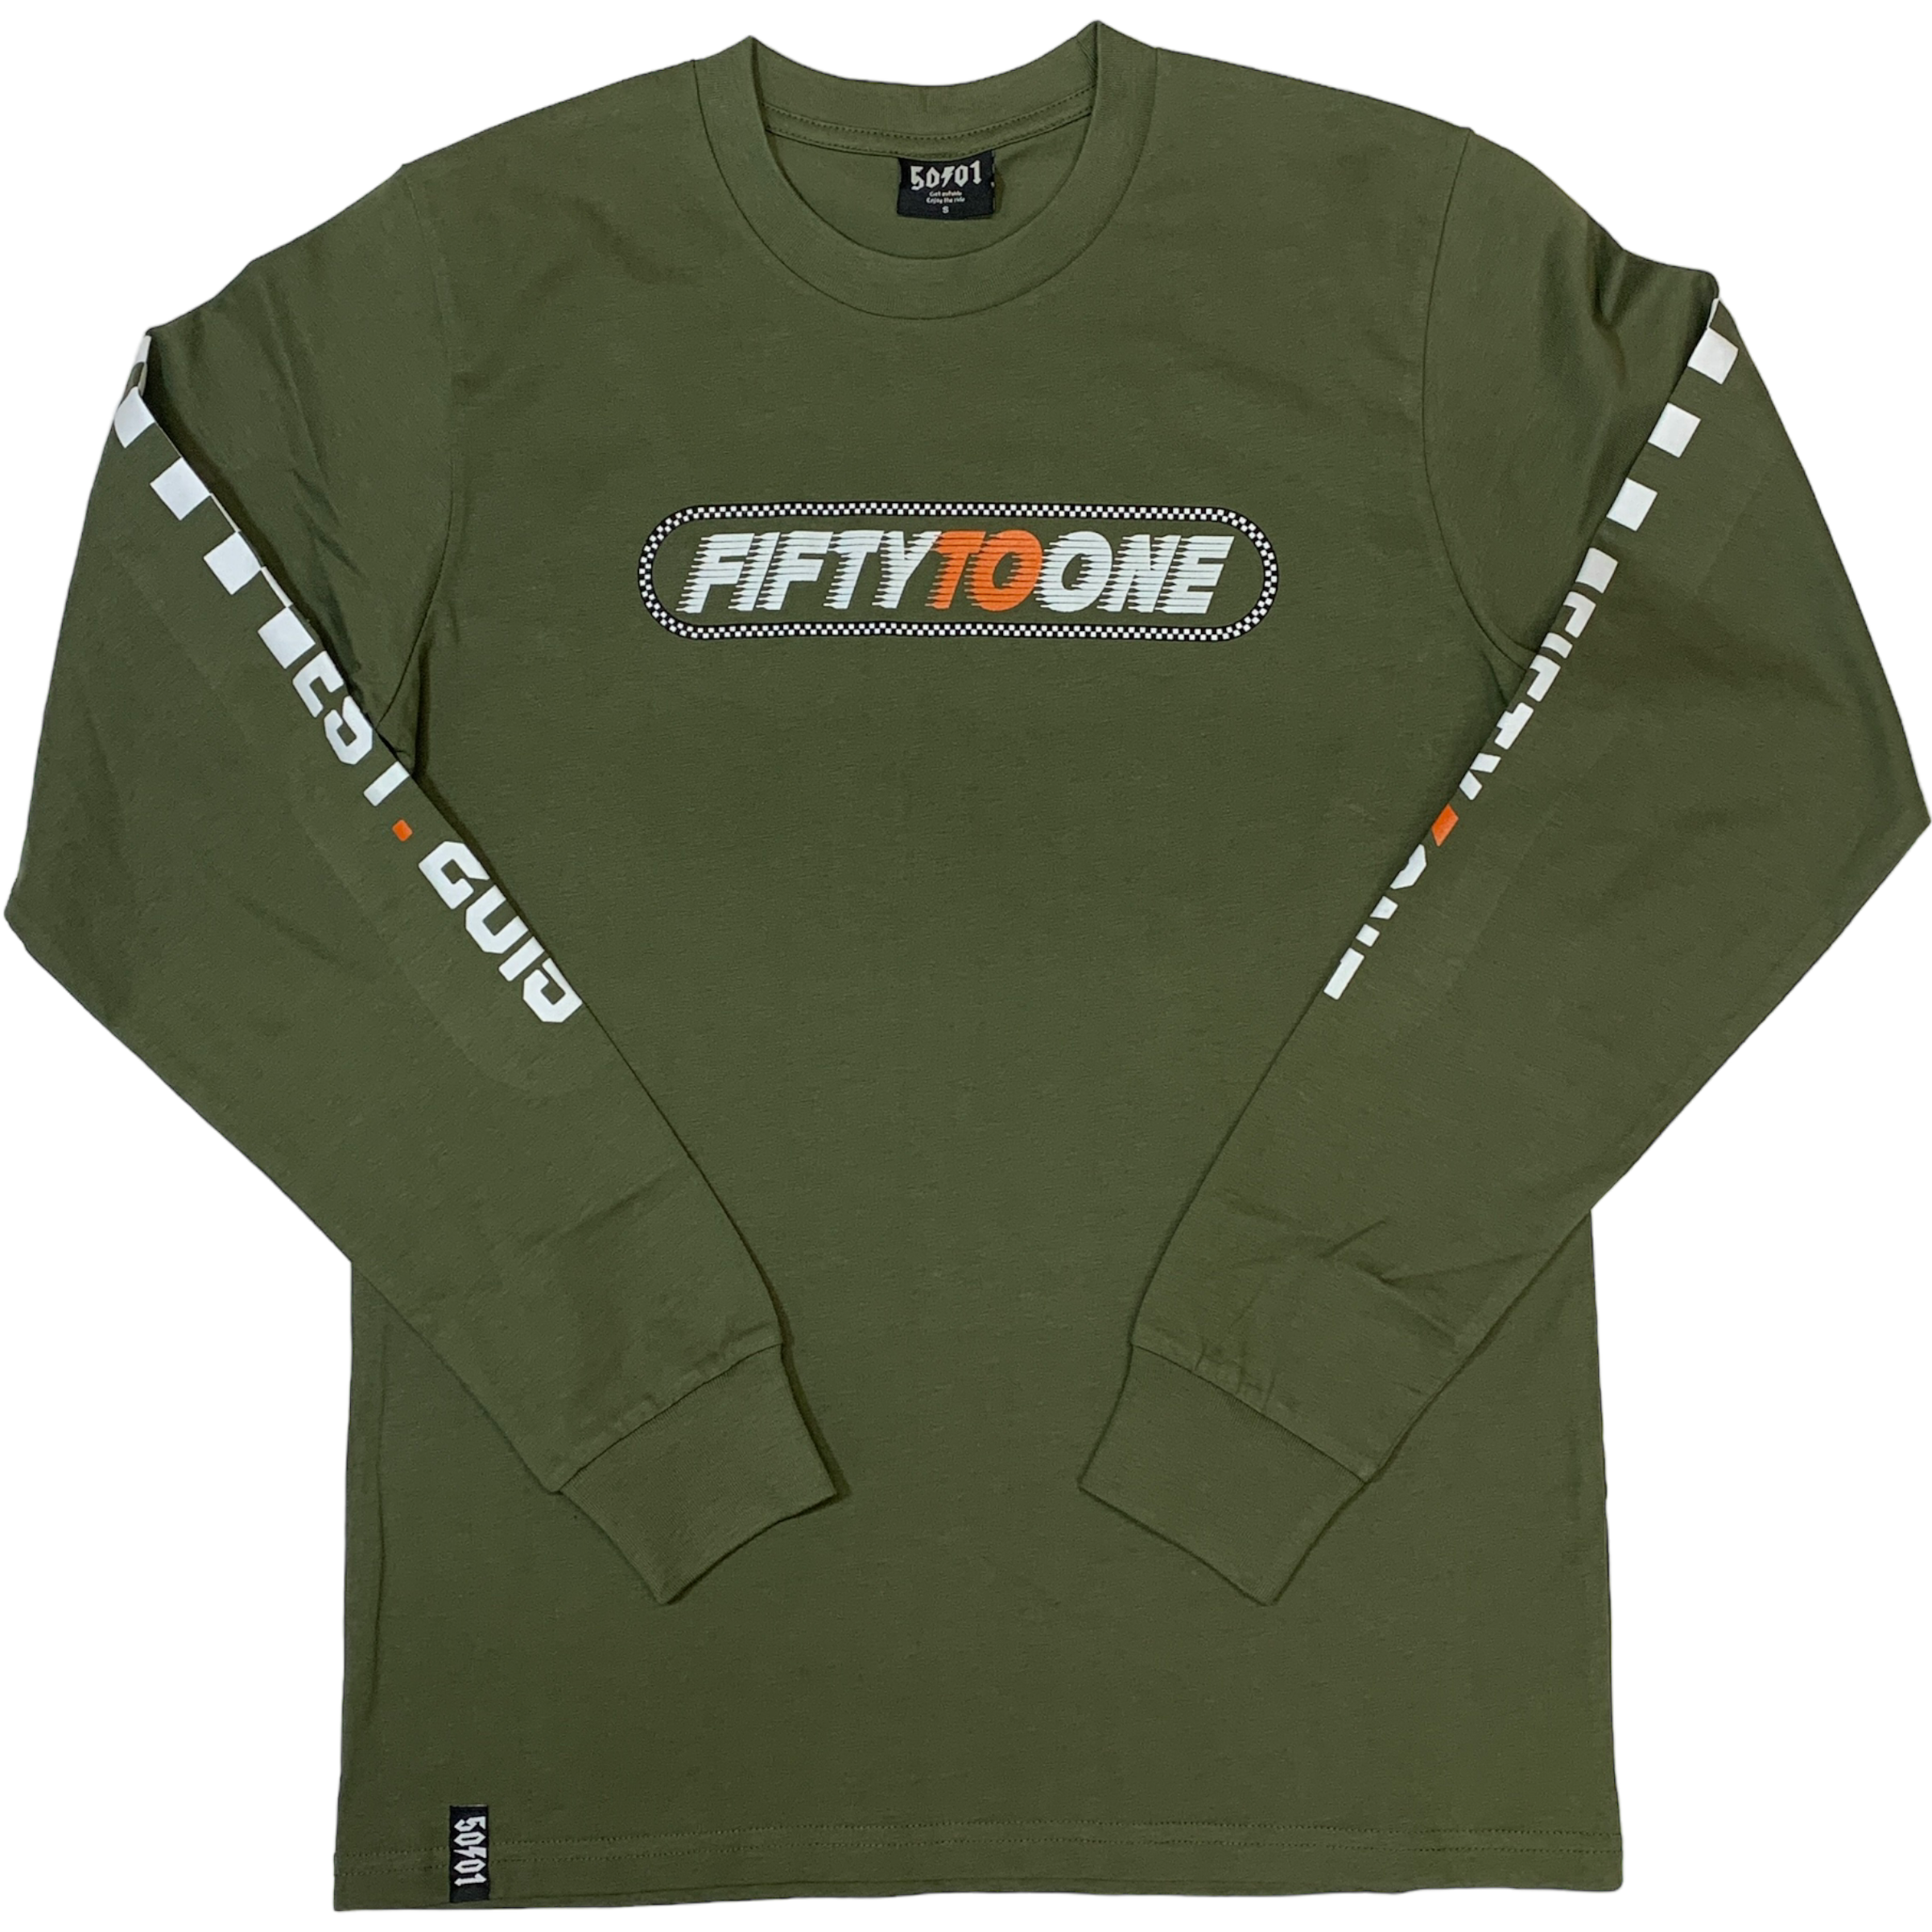 50to01 - RACER LONGSLEEVE T-SHIRT ARMY